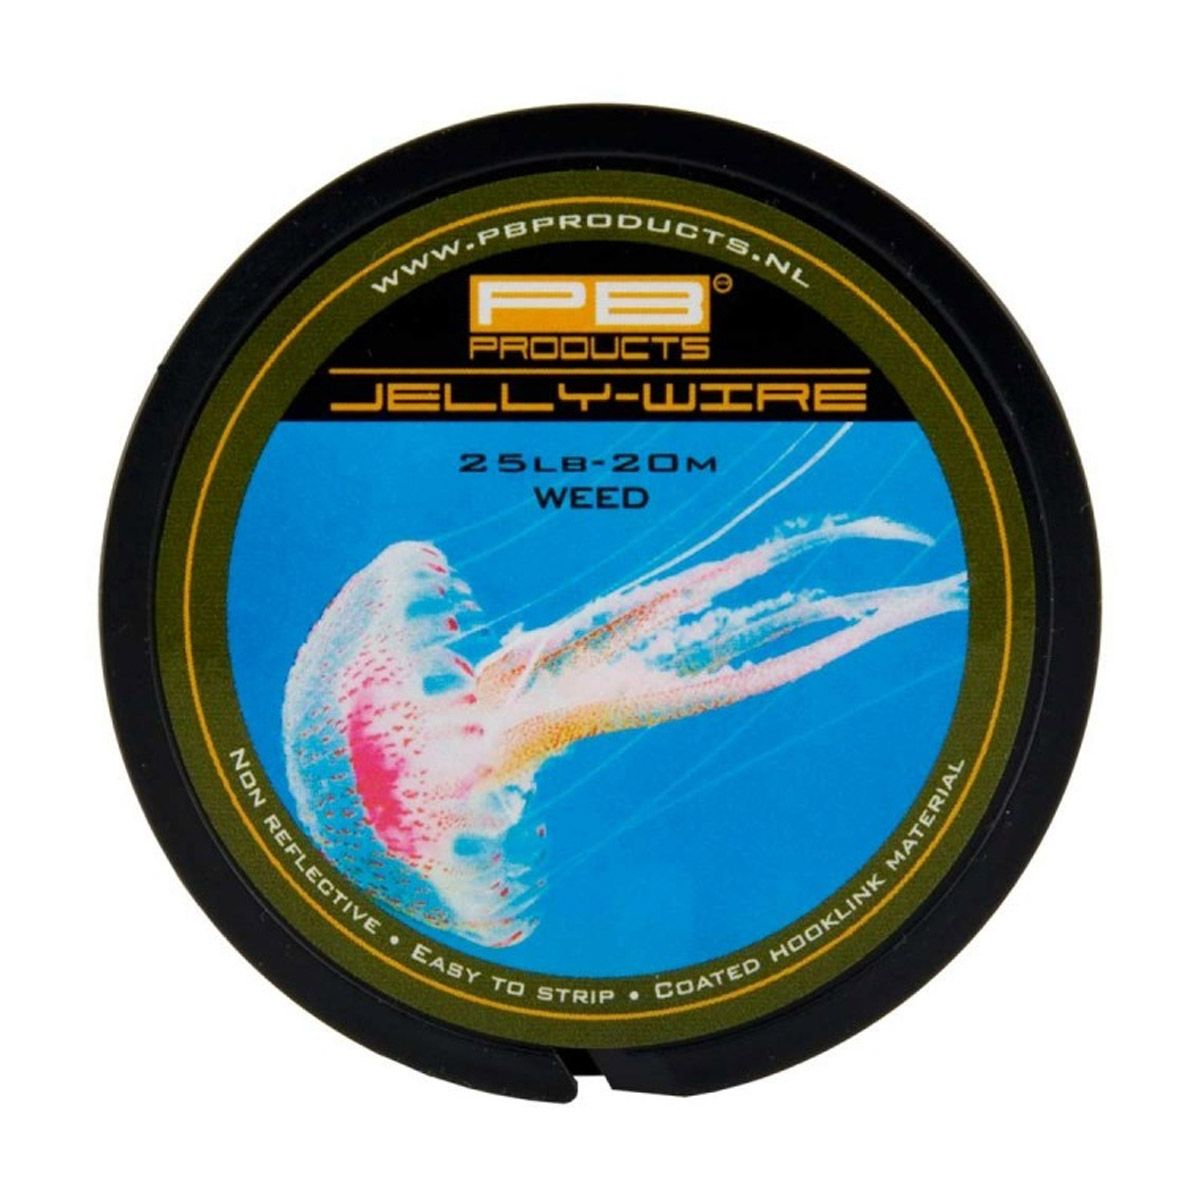 PB Products Jelly Wire Weed